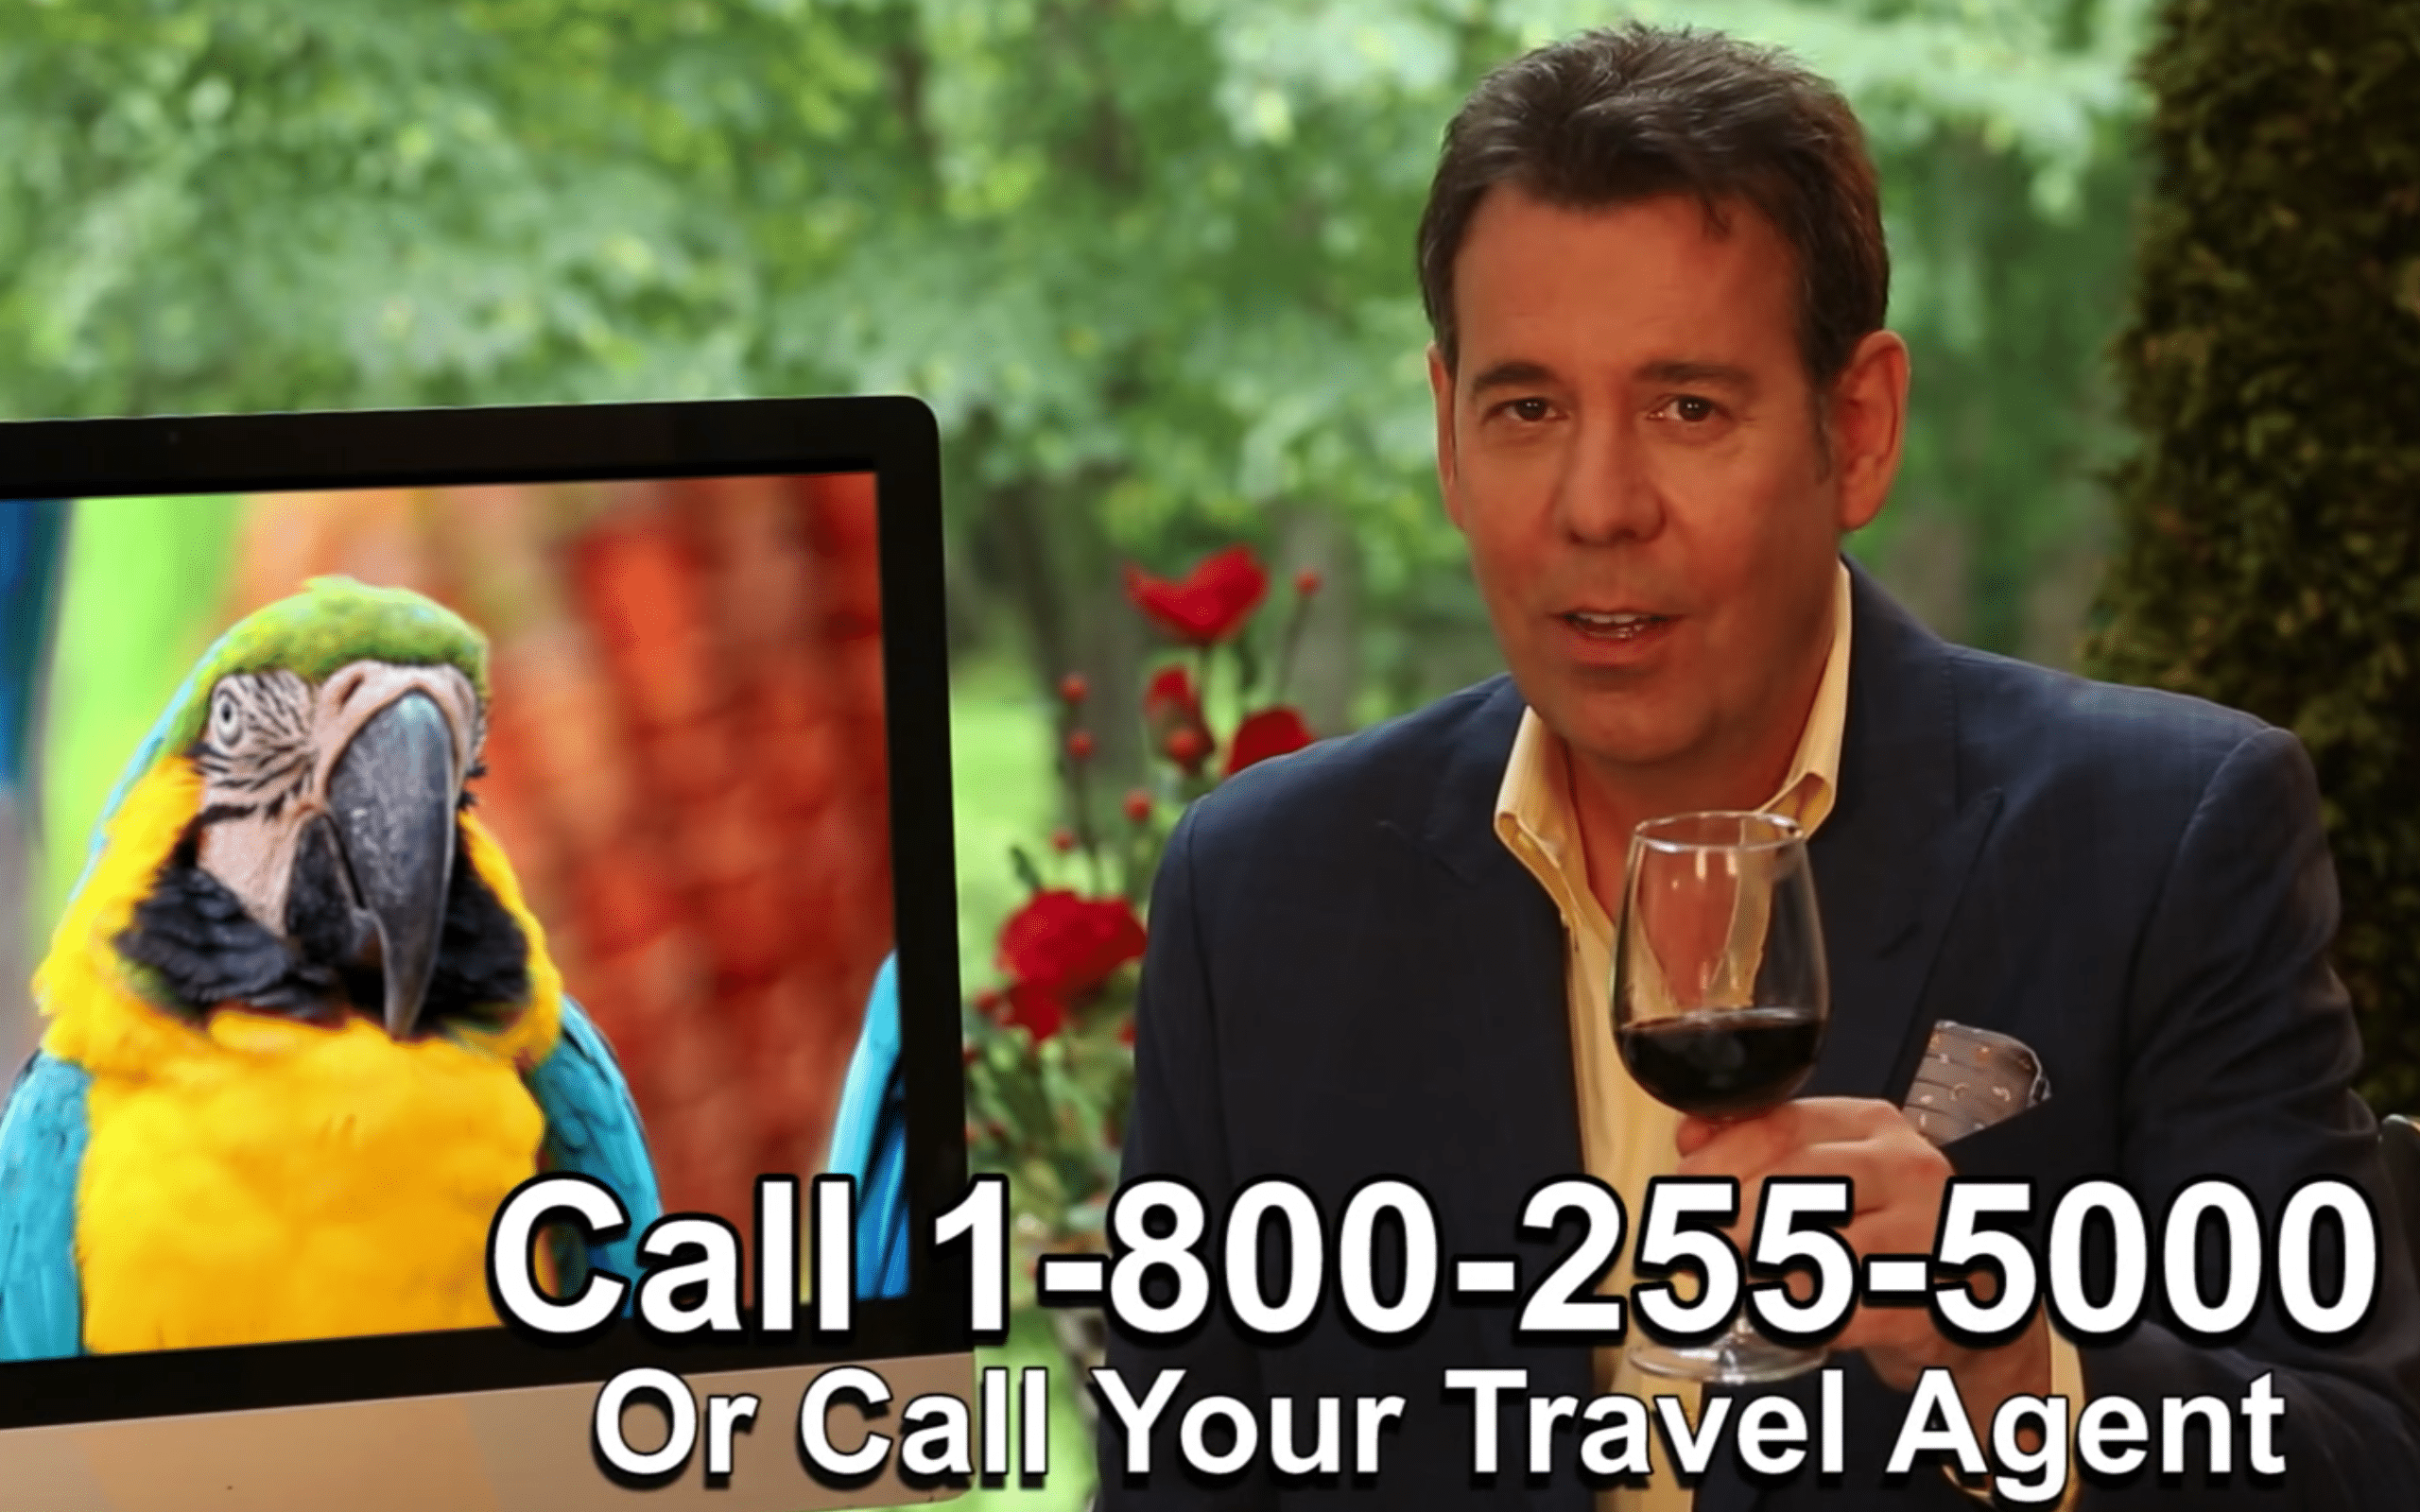 Man (Steve Perillo) wearing a navy sport coat and yellow button up, promoting the Perillo Tours Omnibus Commercial, cheers a glass of red wine to the viewers, words on screen; Call 1-800-255-5000 or Call Your Travel Agent (video production by Merging Media).